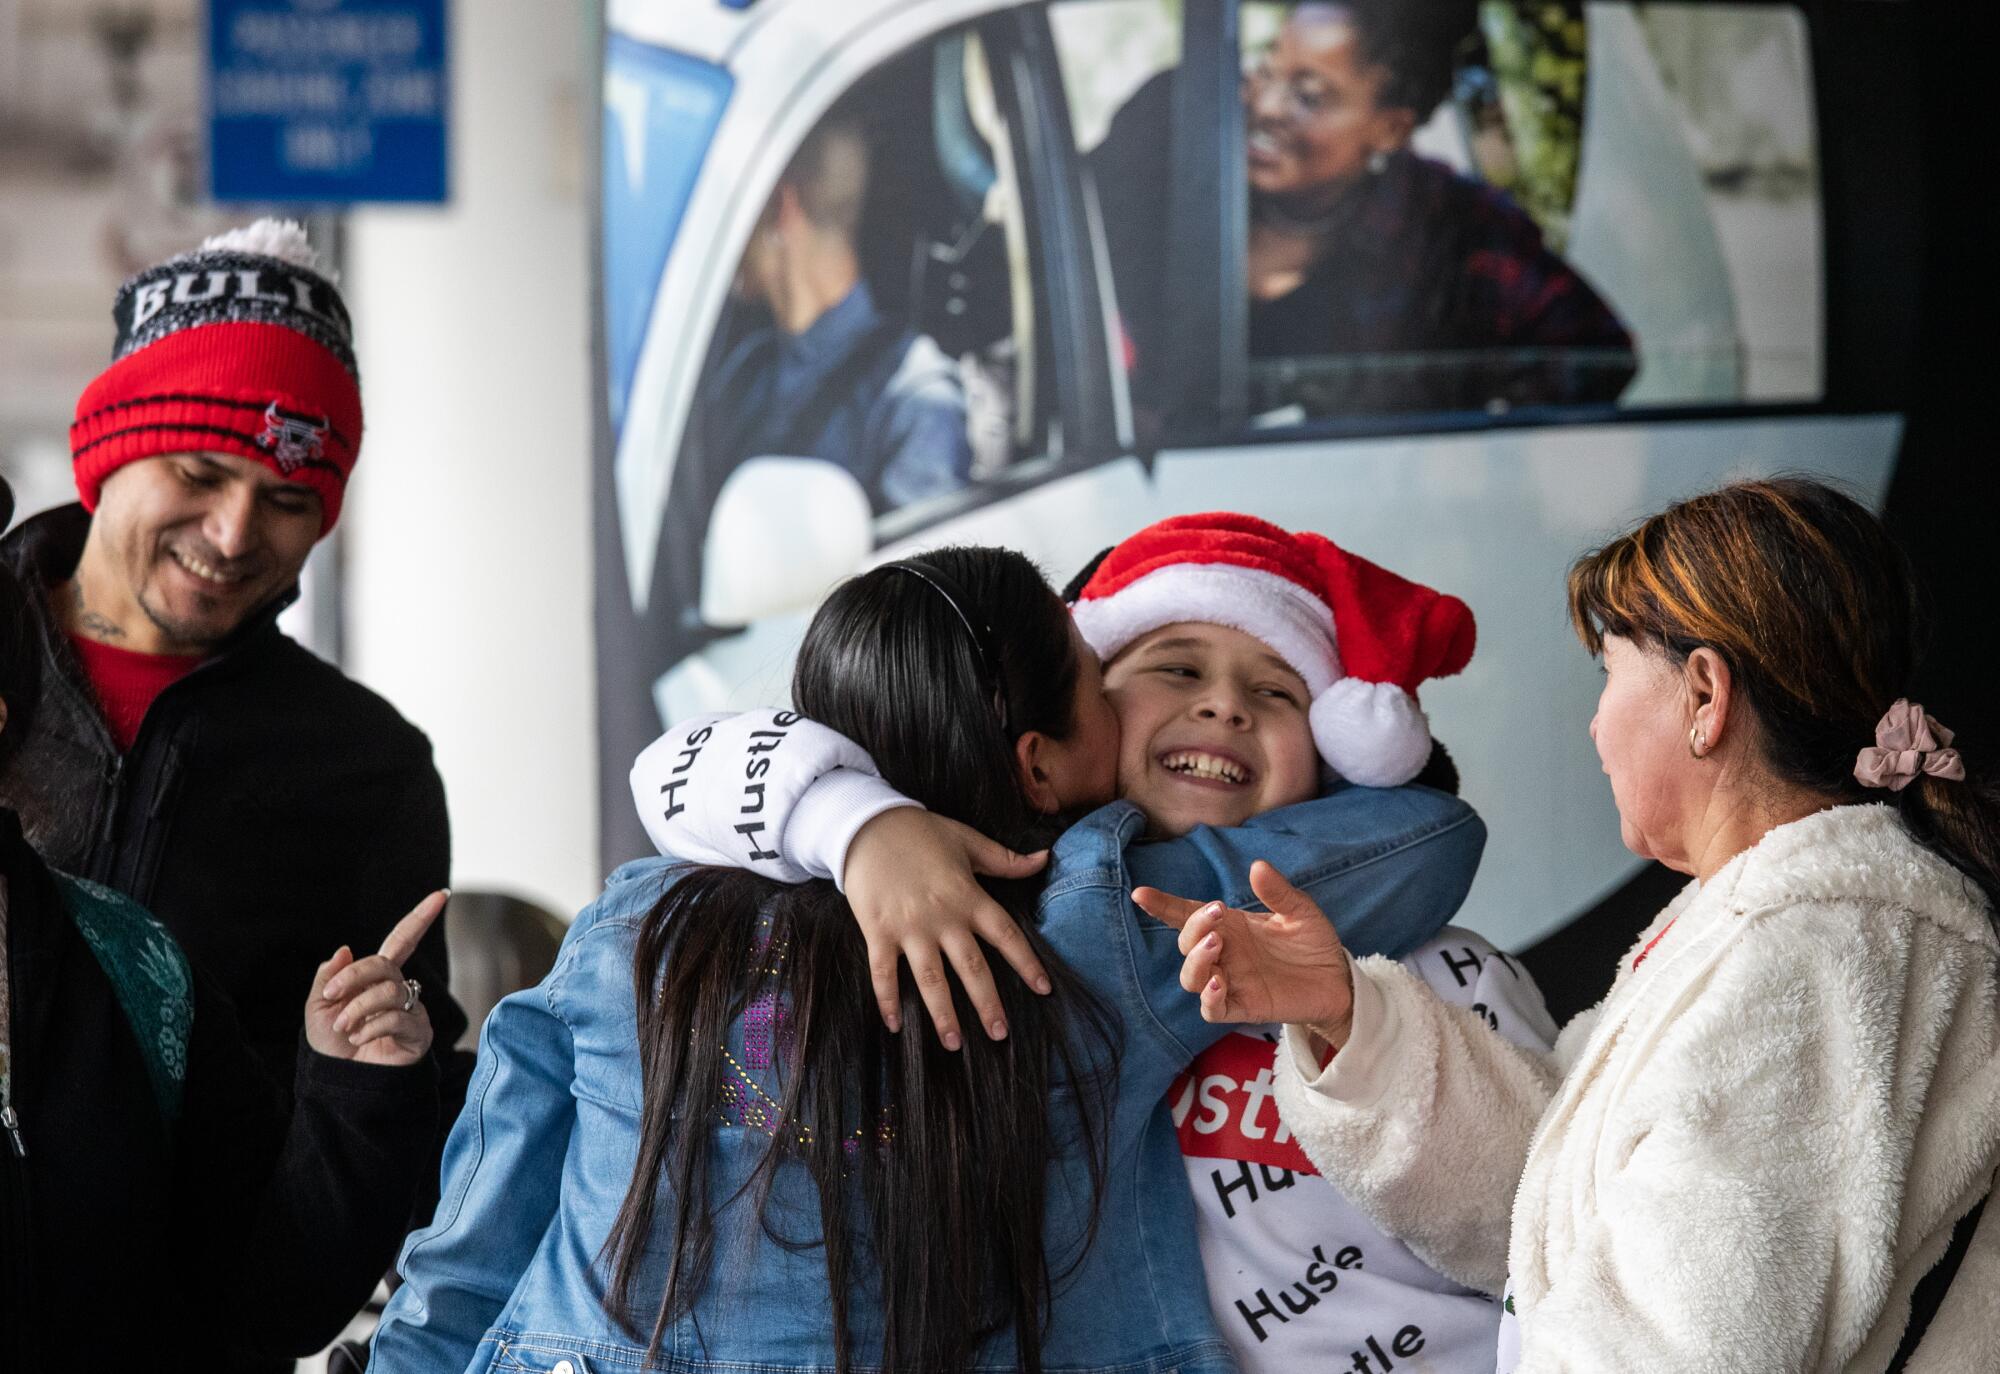 An 11-year-old boy in a Santa hat embraces relatives at the airport.